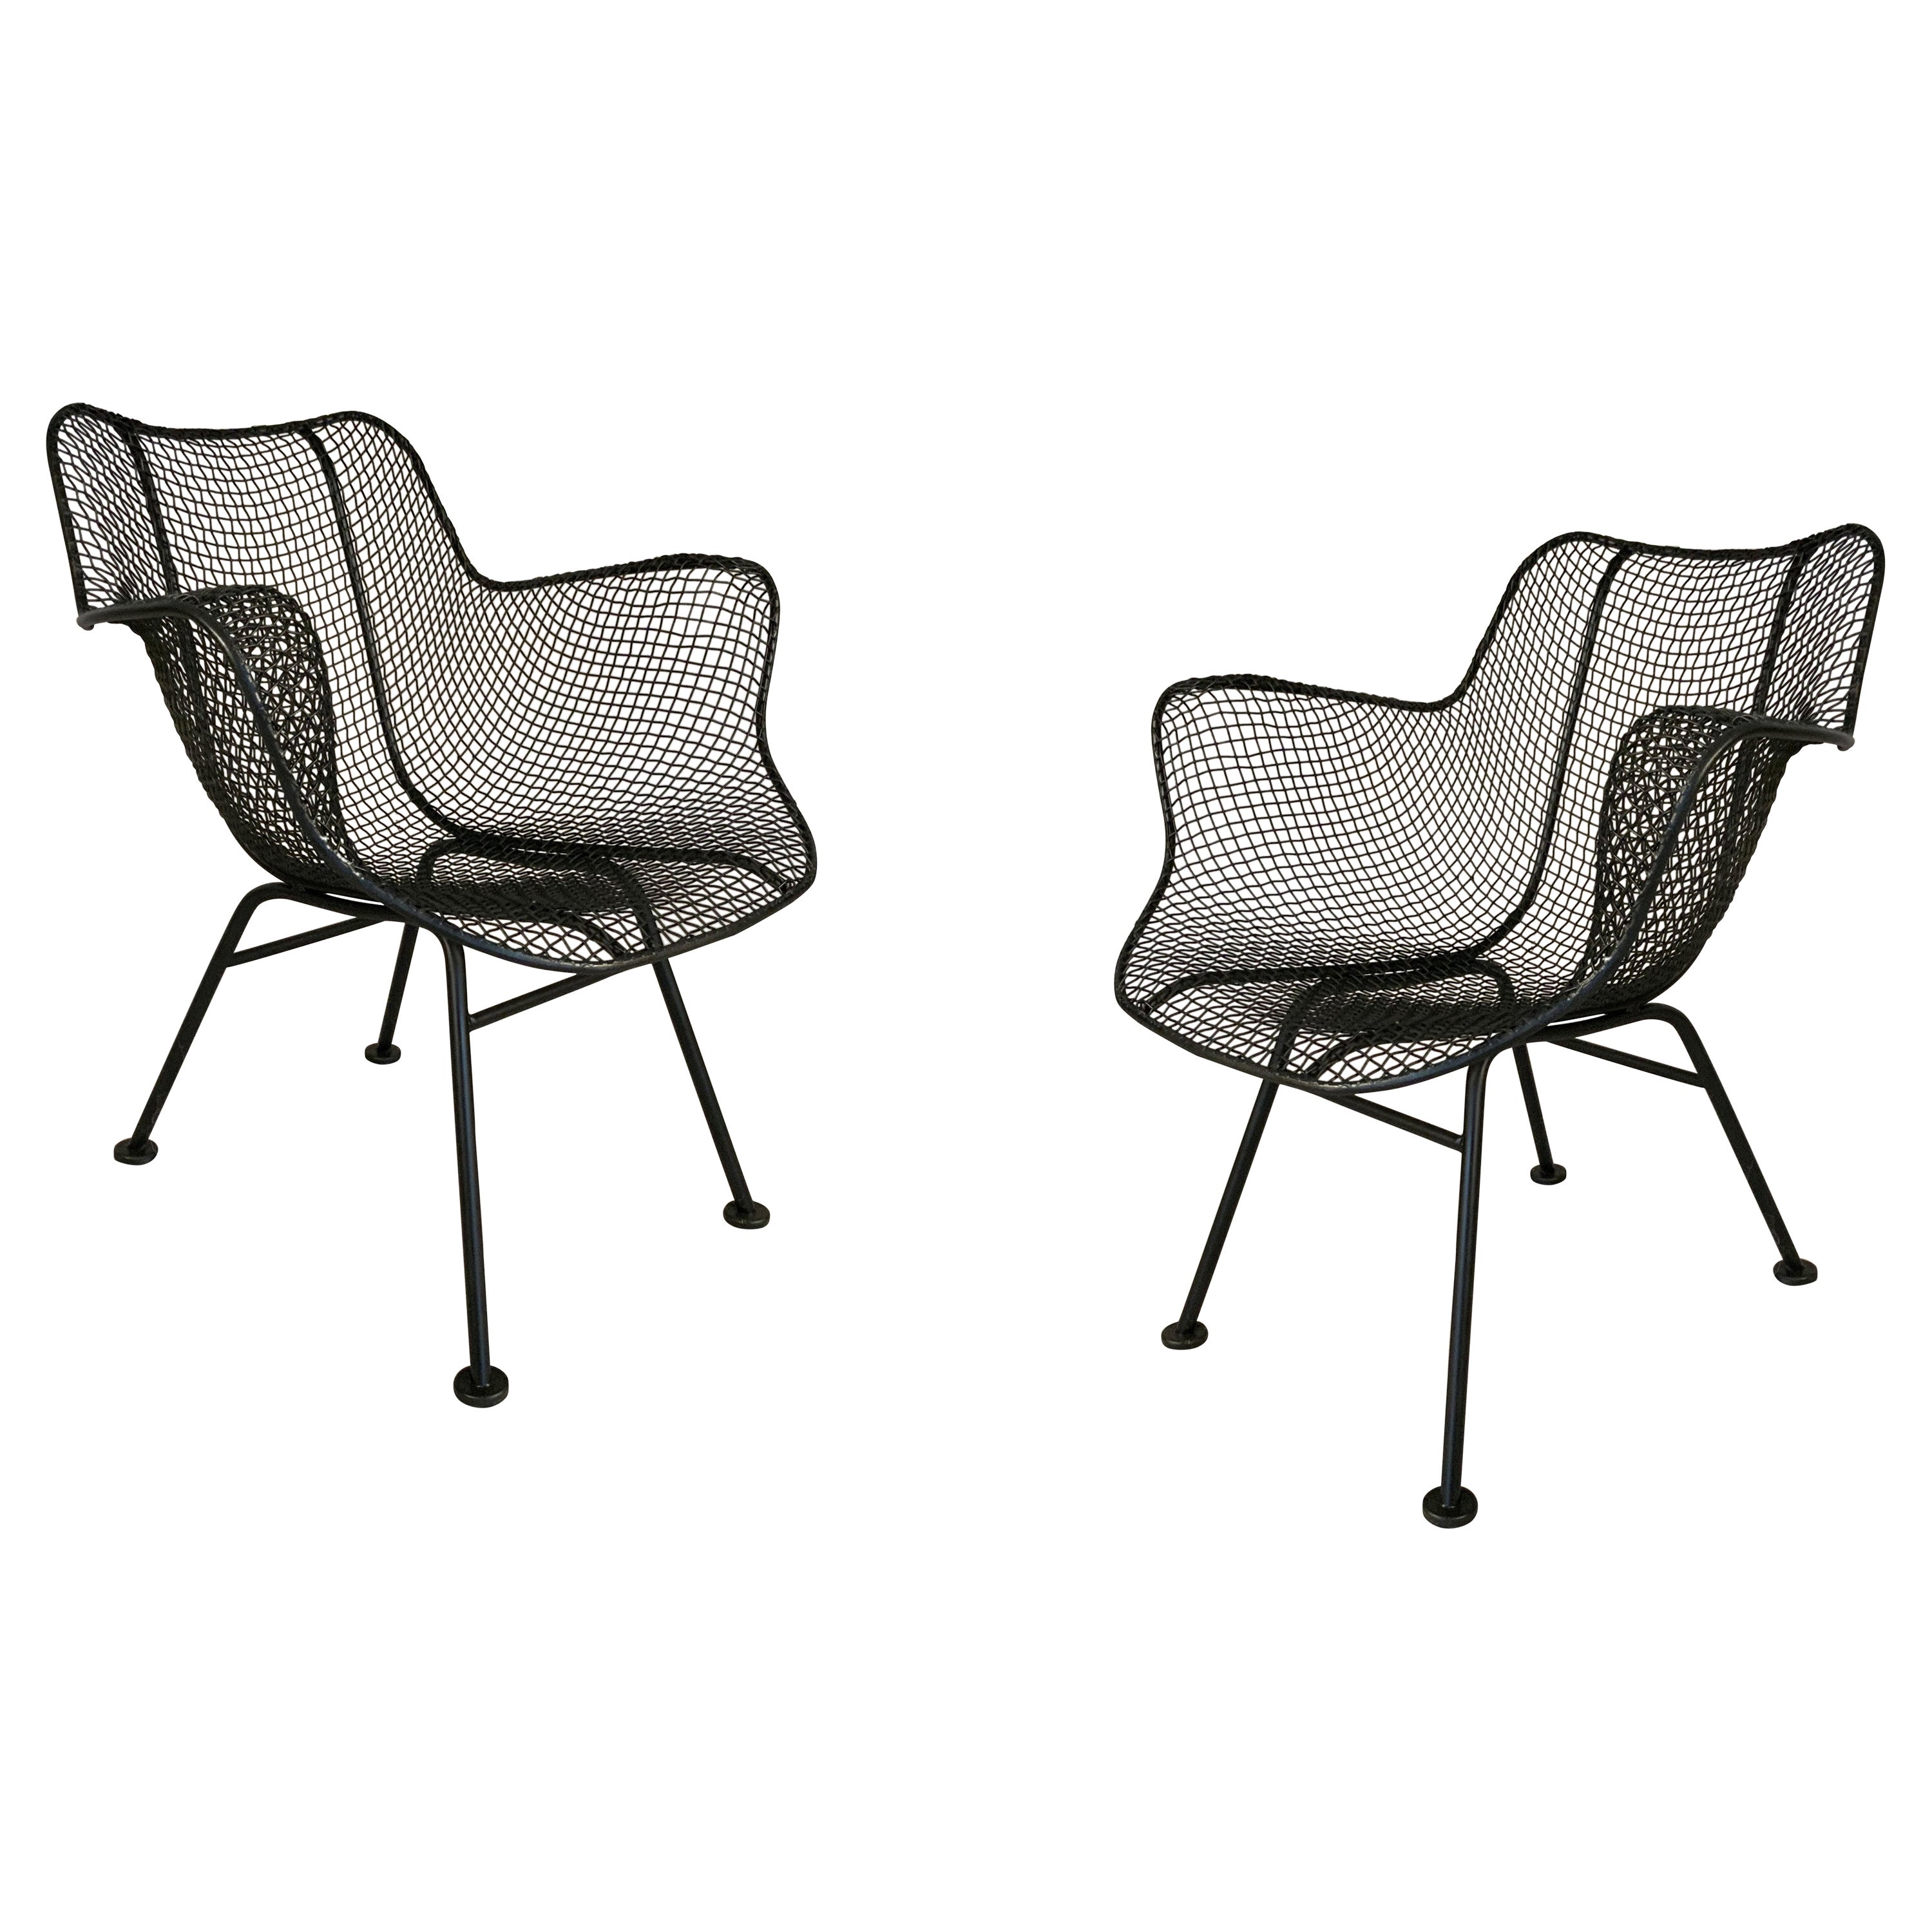 Pair of Vintage Sculptura Lounge Chairs by Russell Woodard